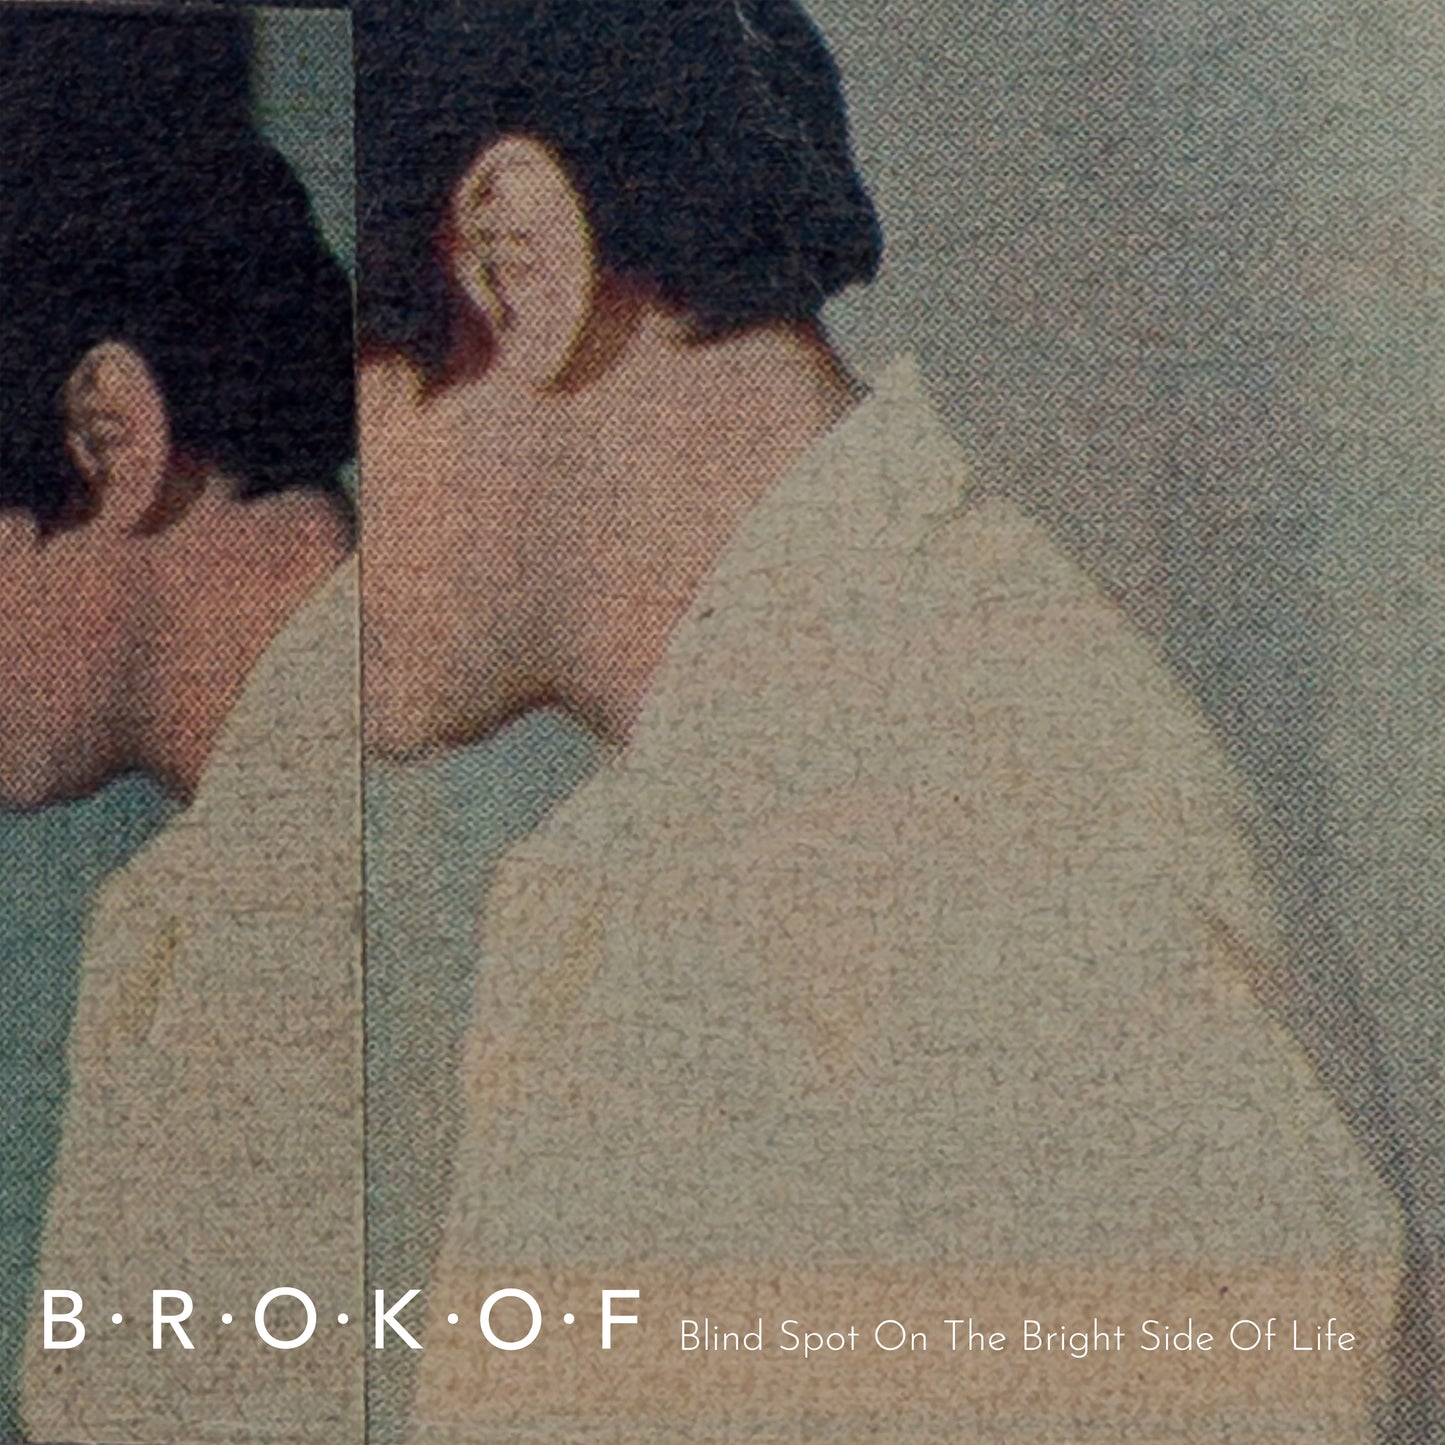 BROKOF "Blind Spot On The Bright Side Of Life" Vinly LP